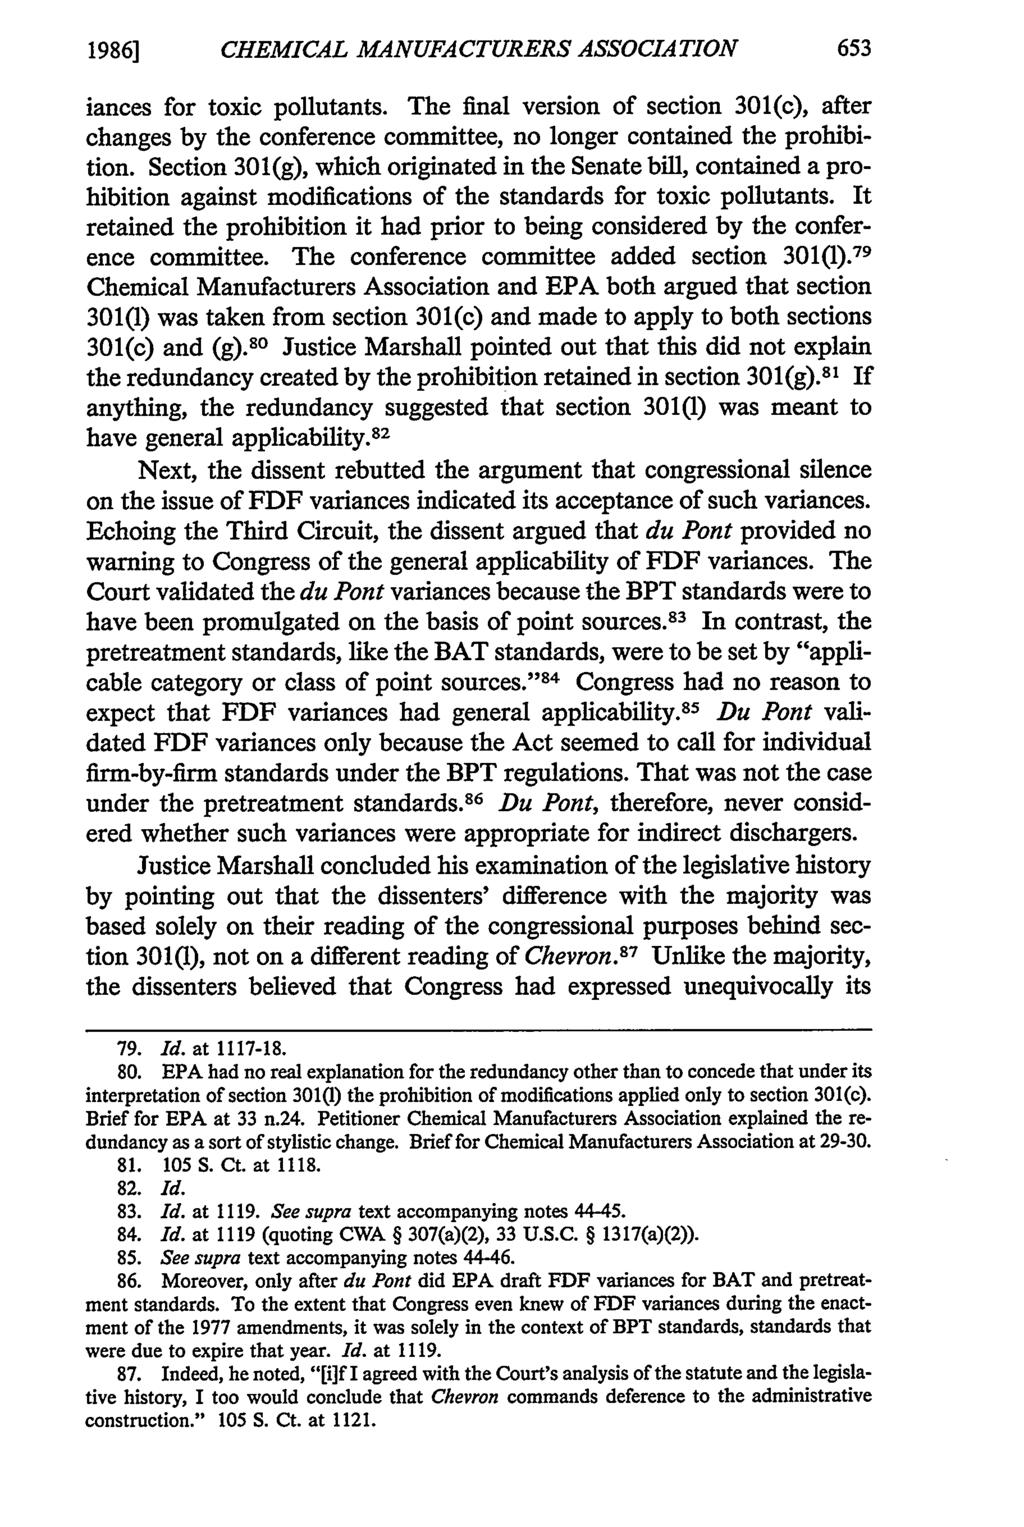 1986] CHEMICAL MANUFACTURERS ASSOCIATION iances for toxic pollutants. The final version of section 301(c), after changes by the conference committee, no longer contained the prohibition.